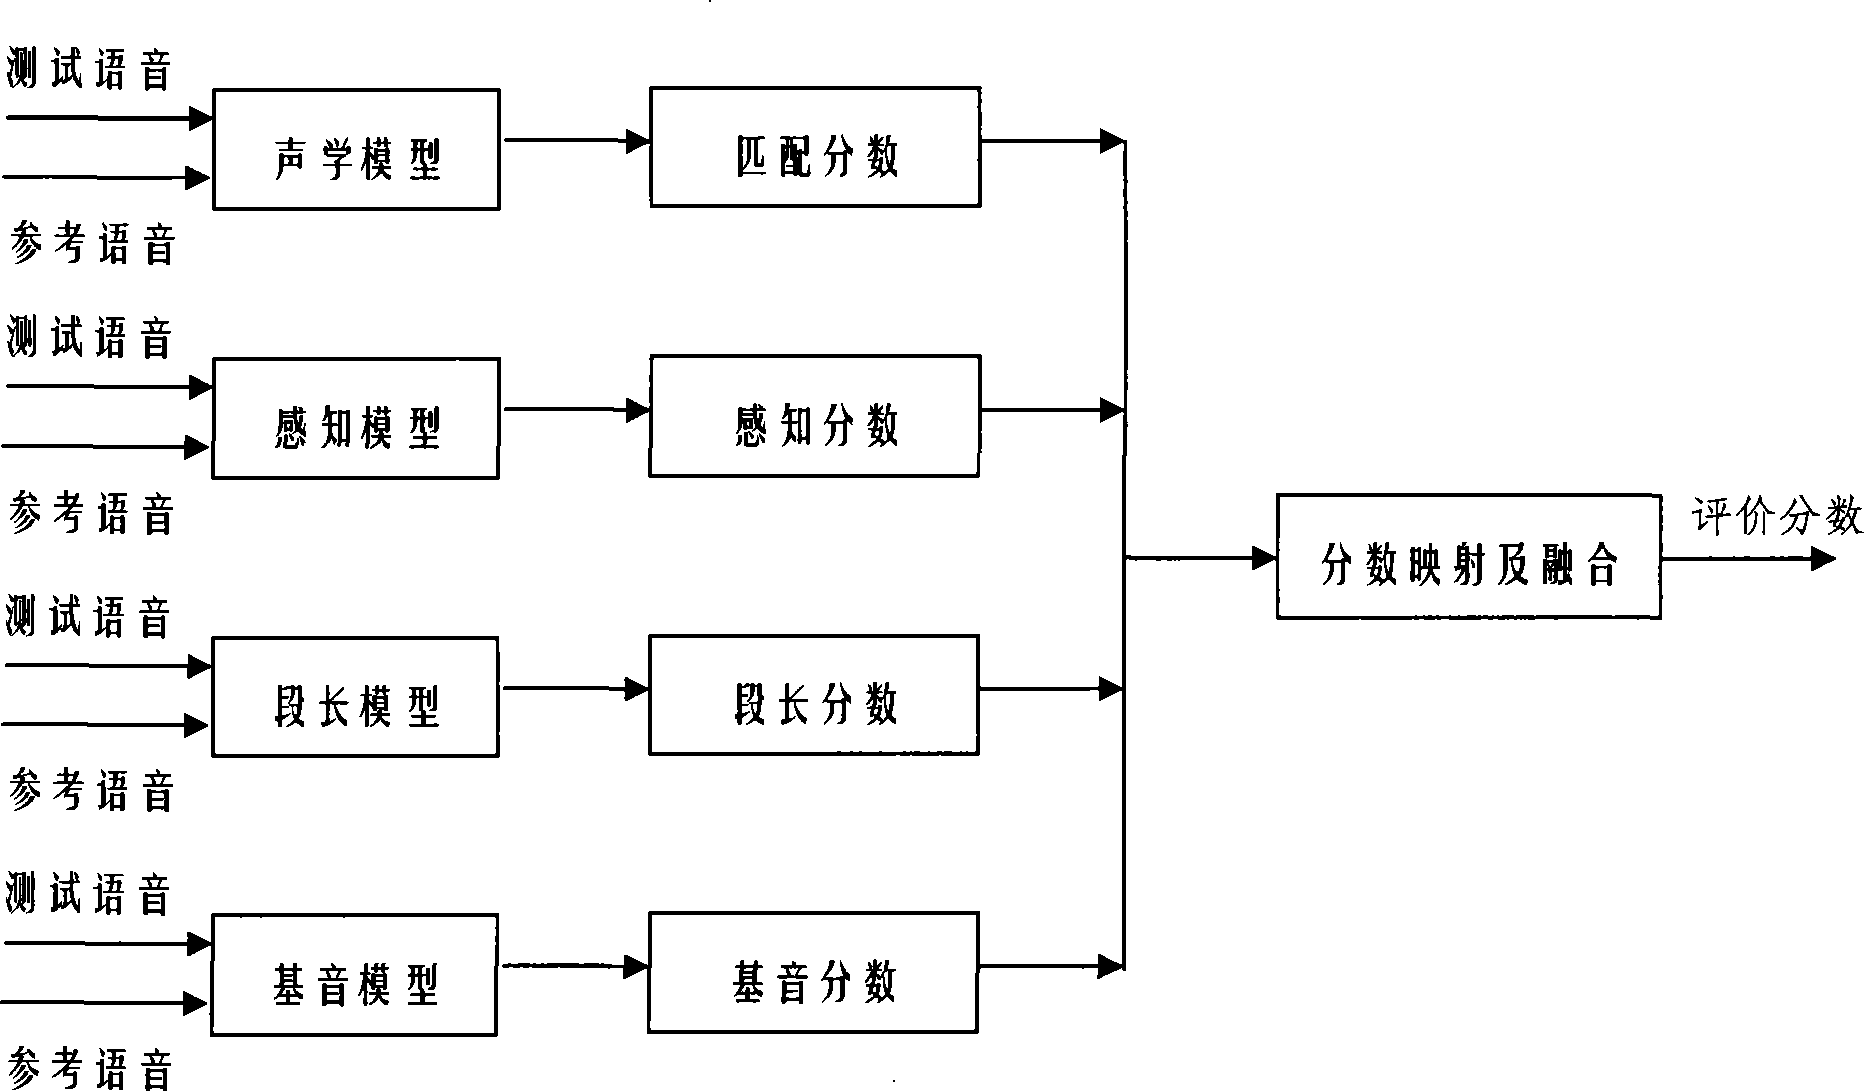 Pronunciation quality evaluation method of computer auxiliary language learning system